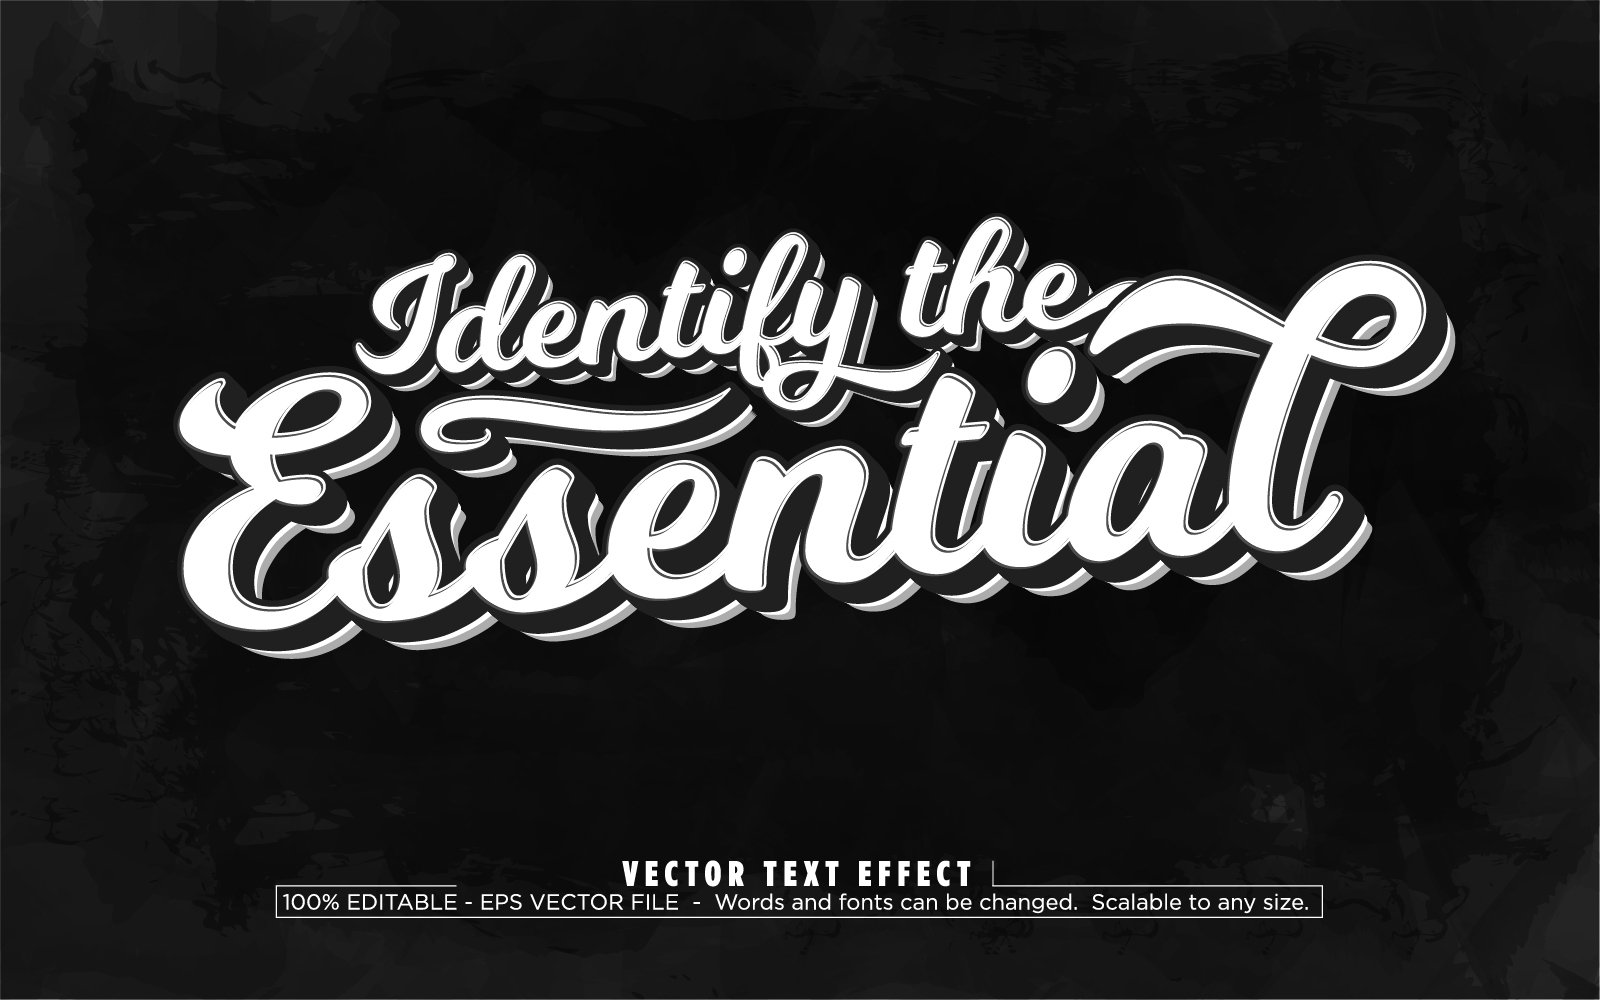 Identify The Essential - Editable Text Effect, Minimal And Cartoon Text Style, Graphics Illustration